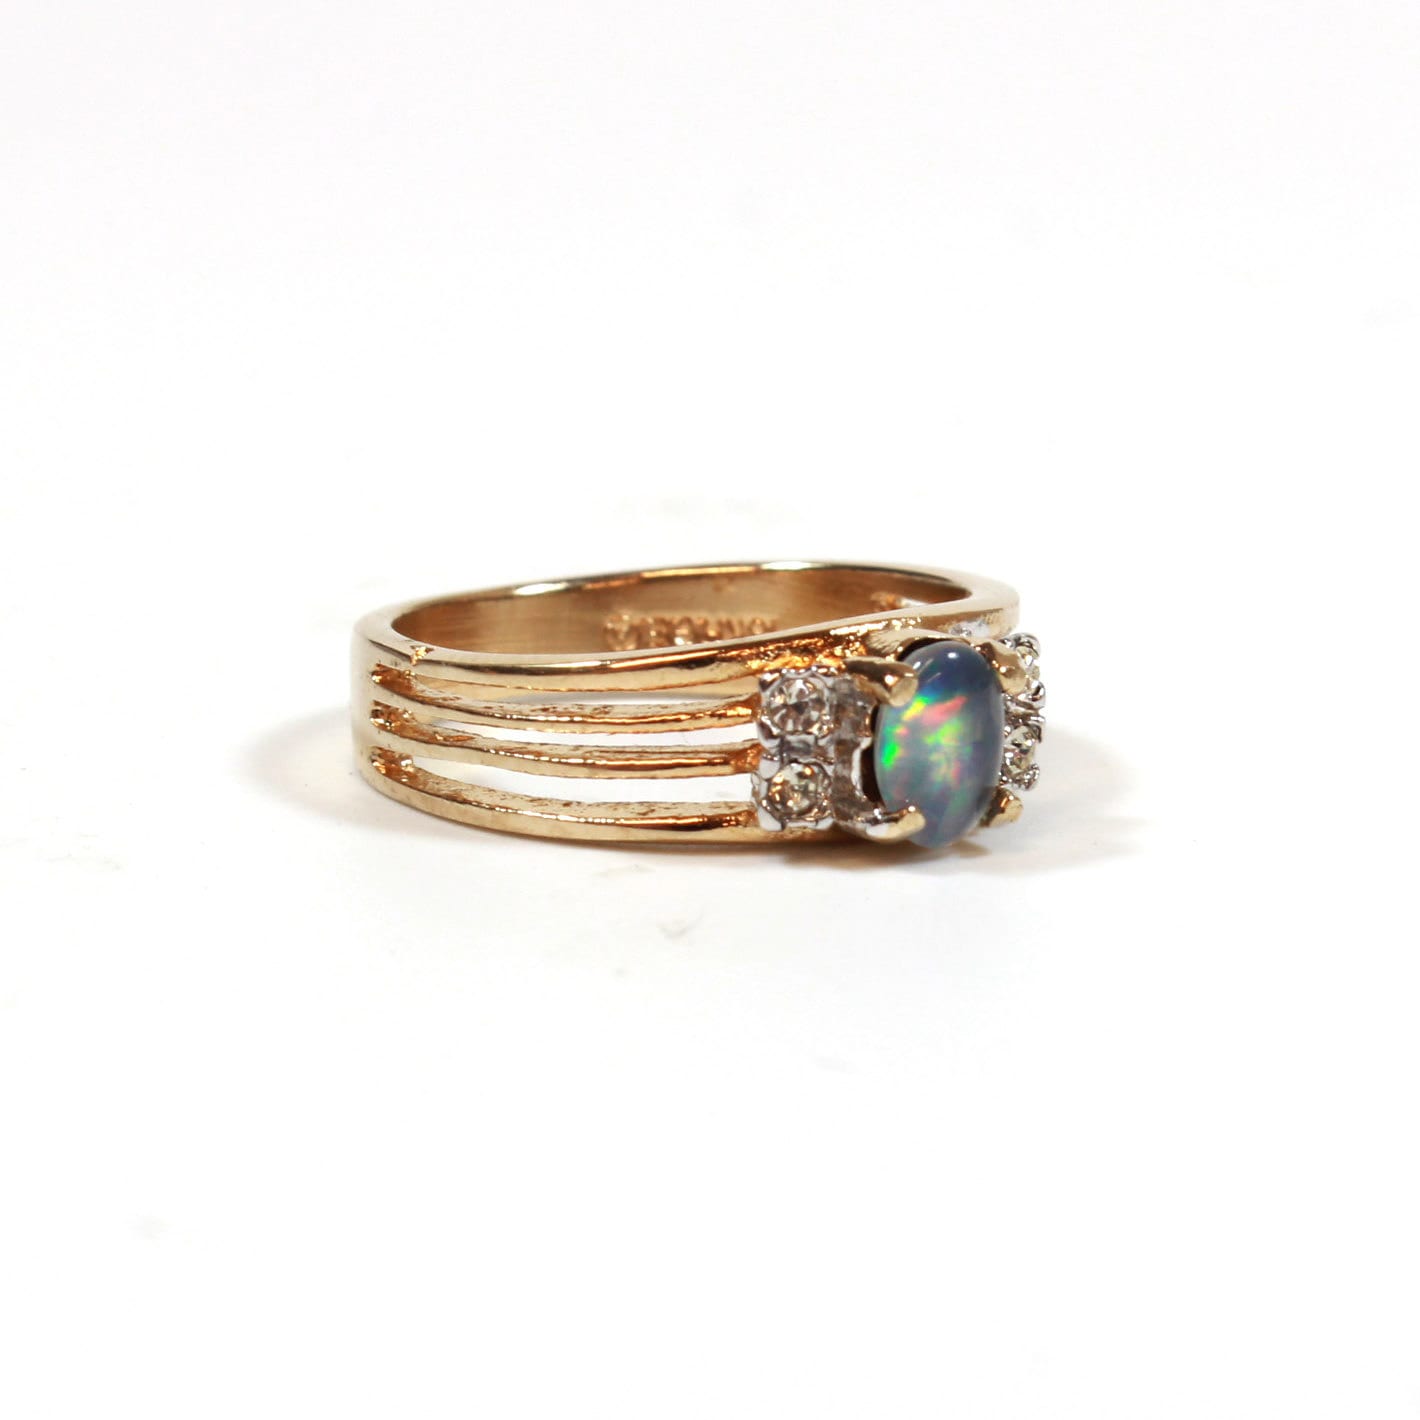 Vintage Ring Retro Genuine Triplet Opal Ring set with Genuine Swarovski Crystal 18k Gold Plated Antique Jewelry for Women #R1318